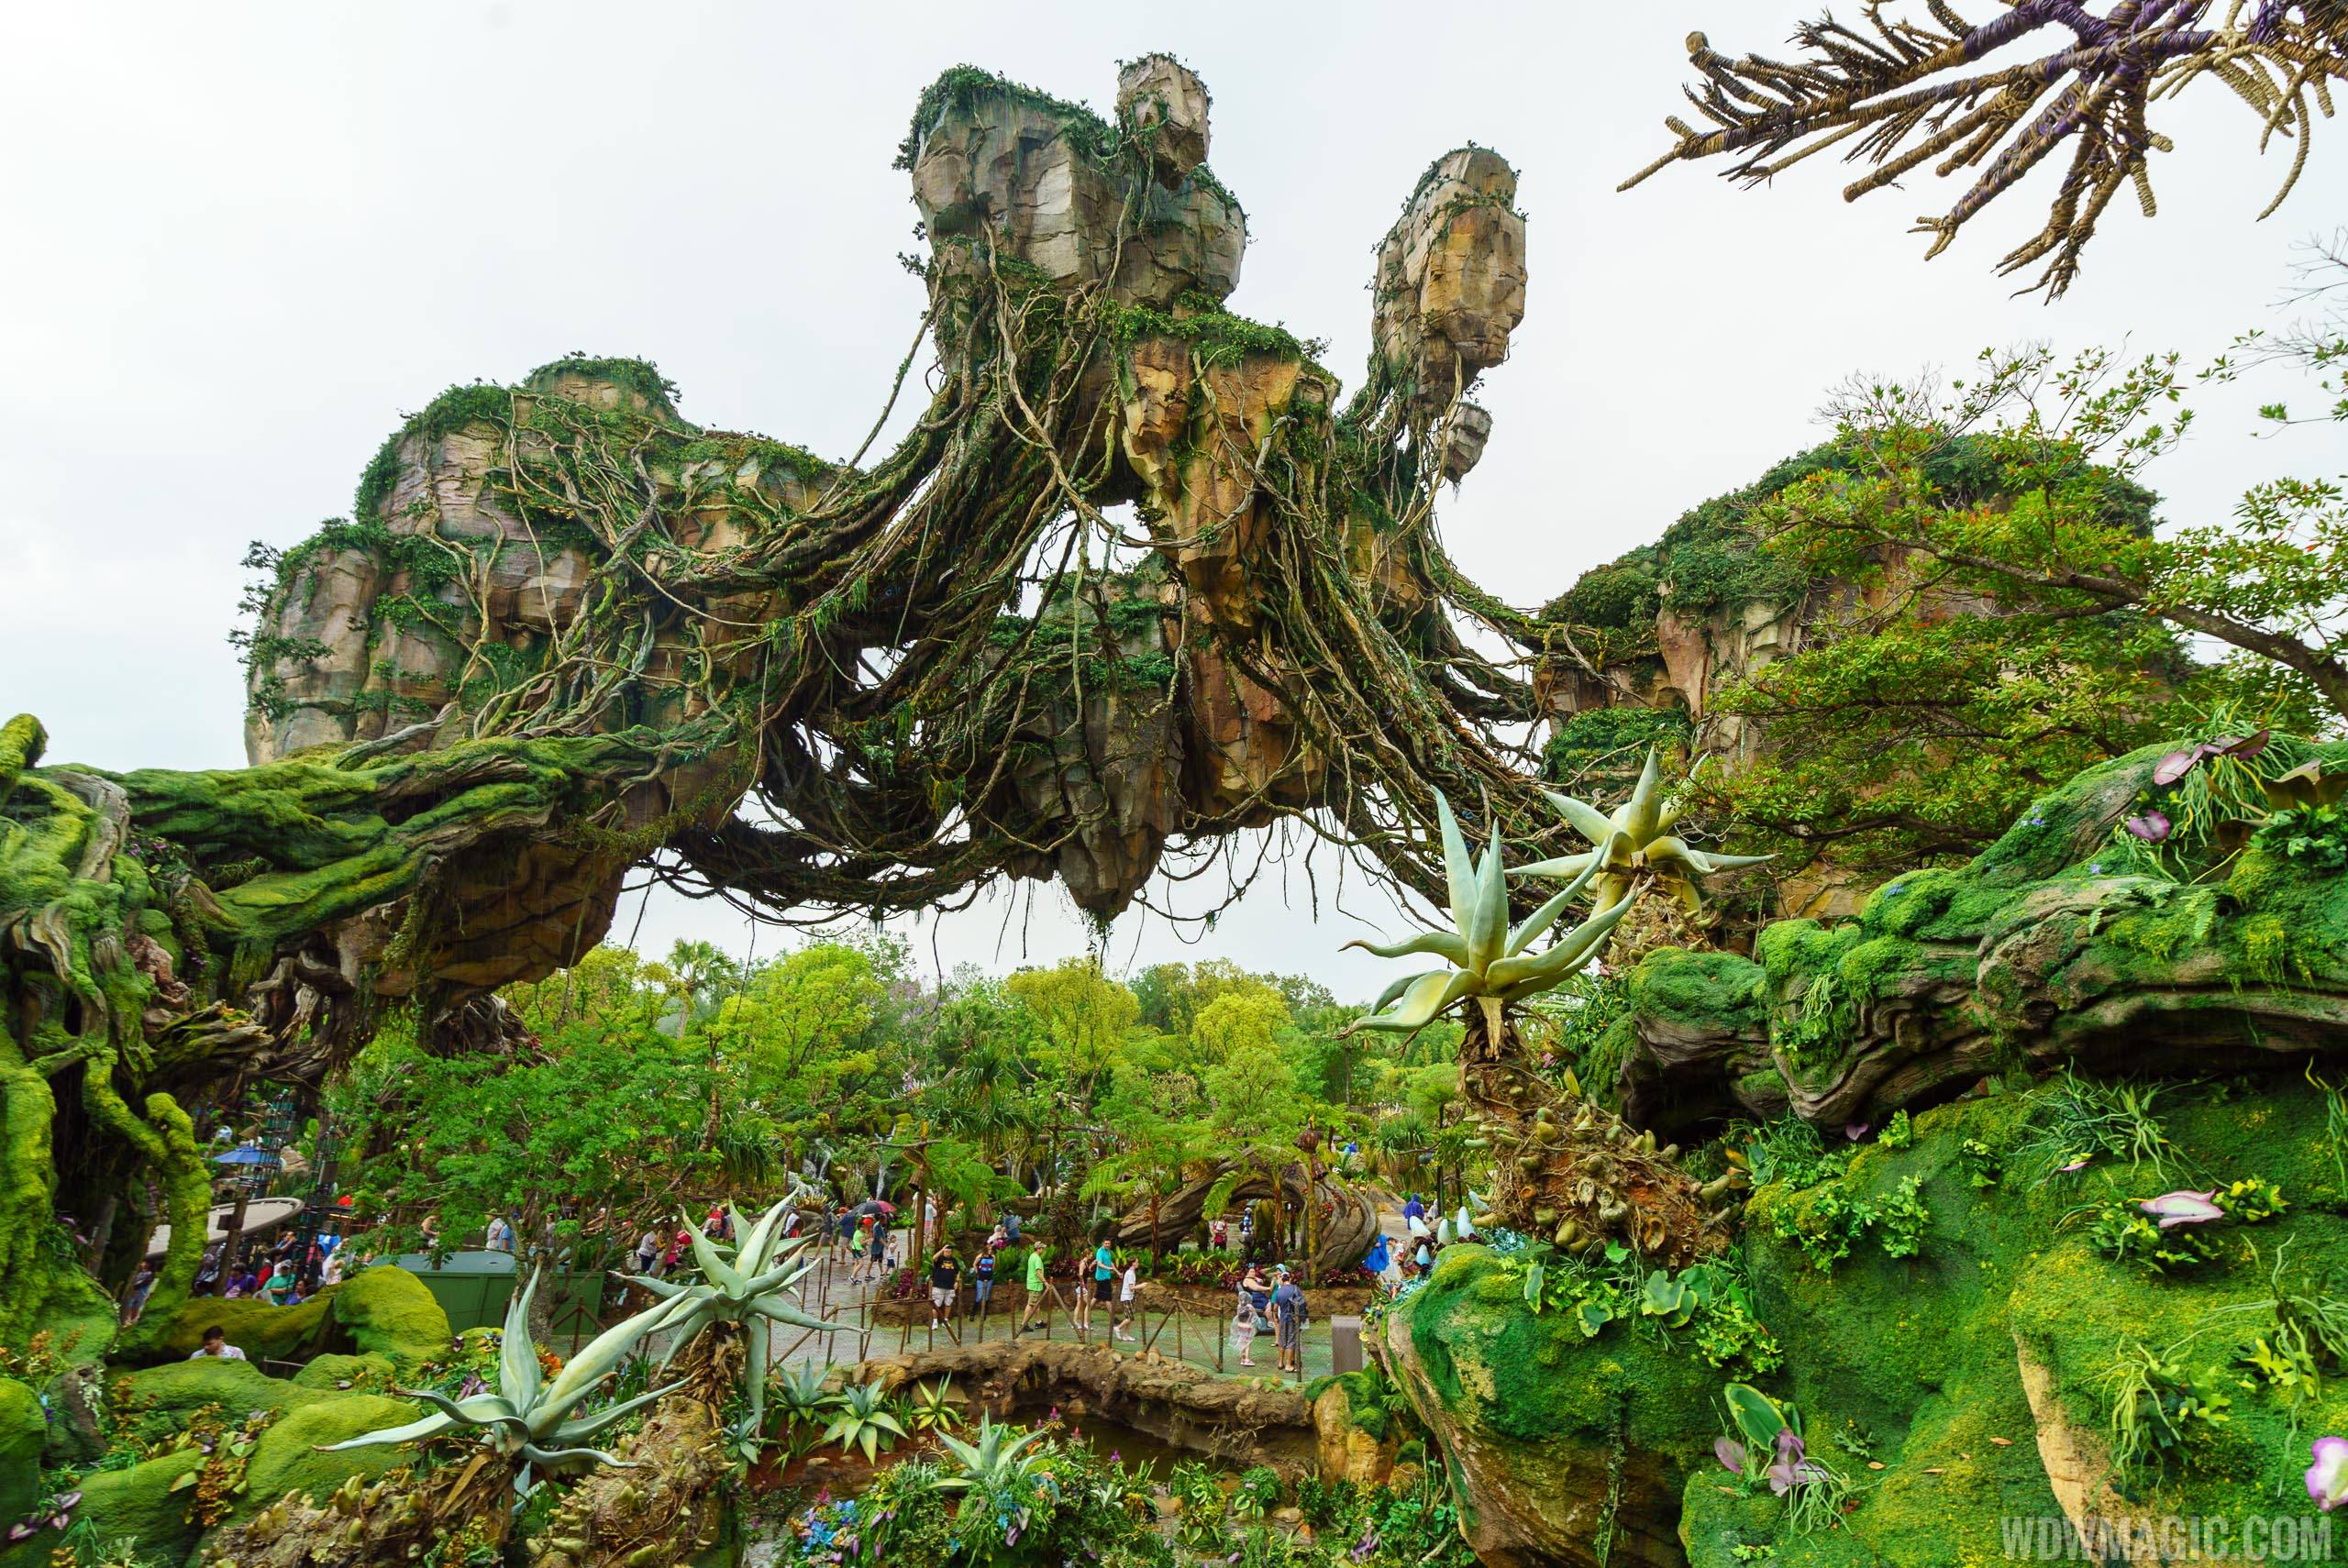 View of the floating mountains from Avatar Flight of Passage queue